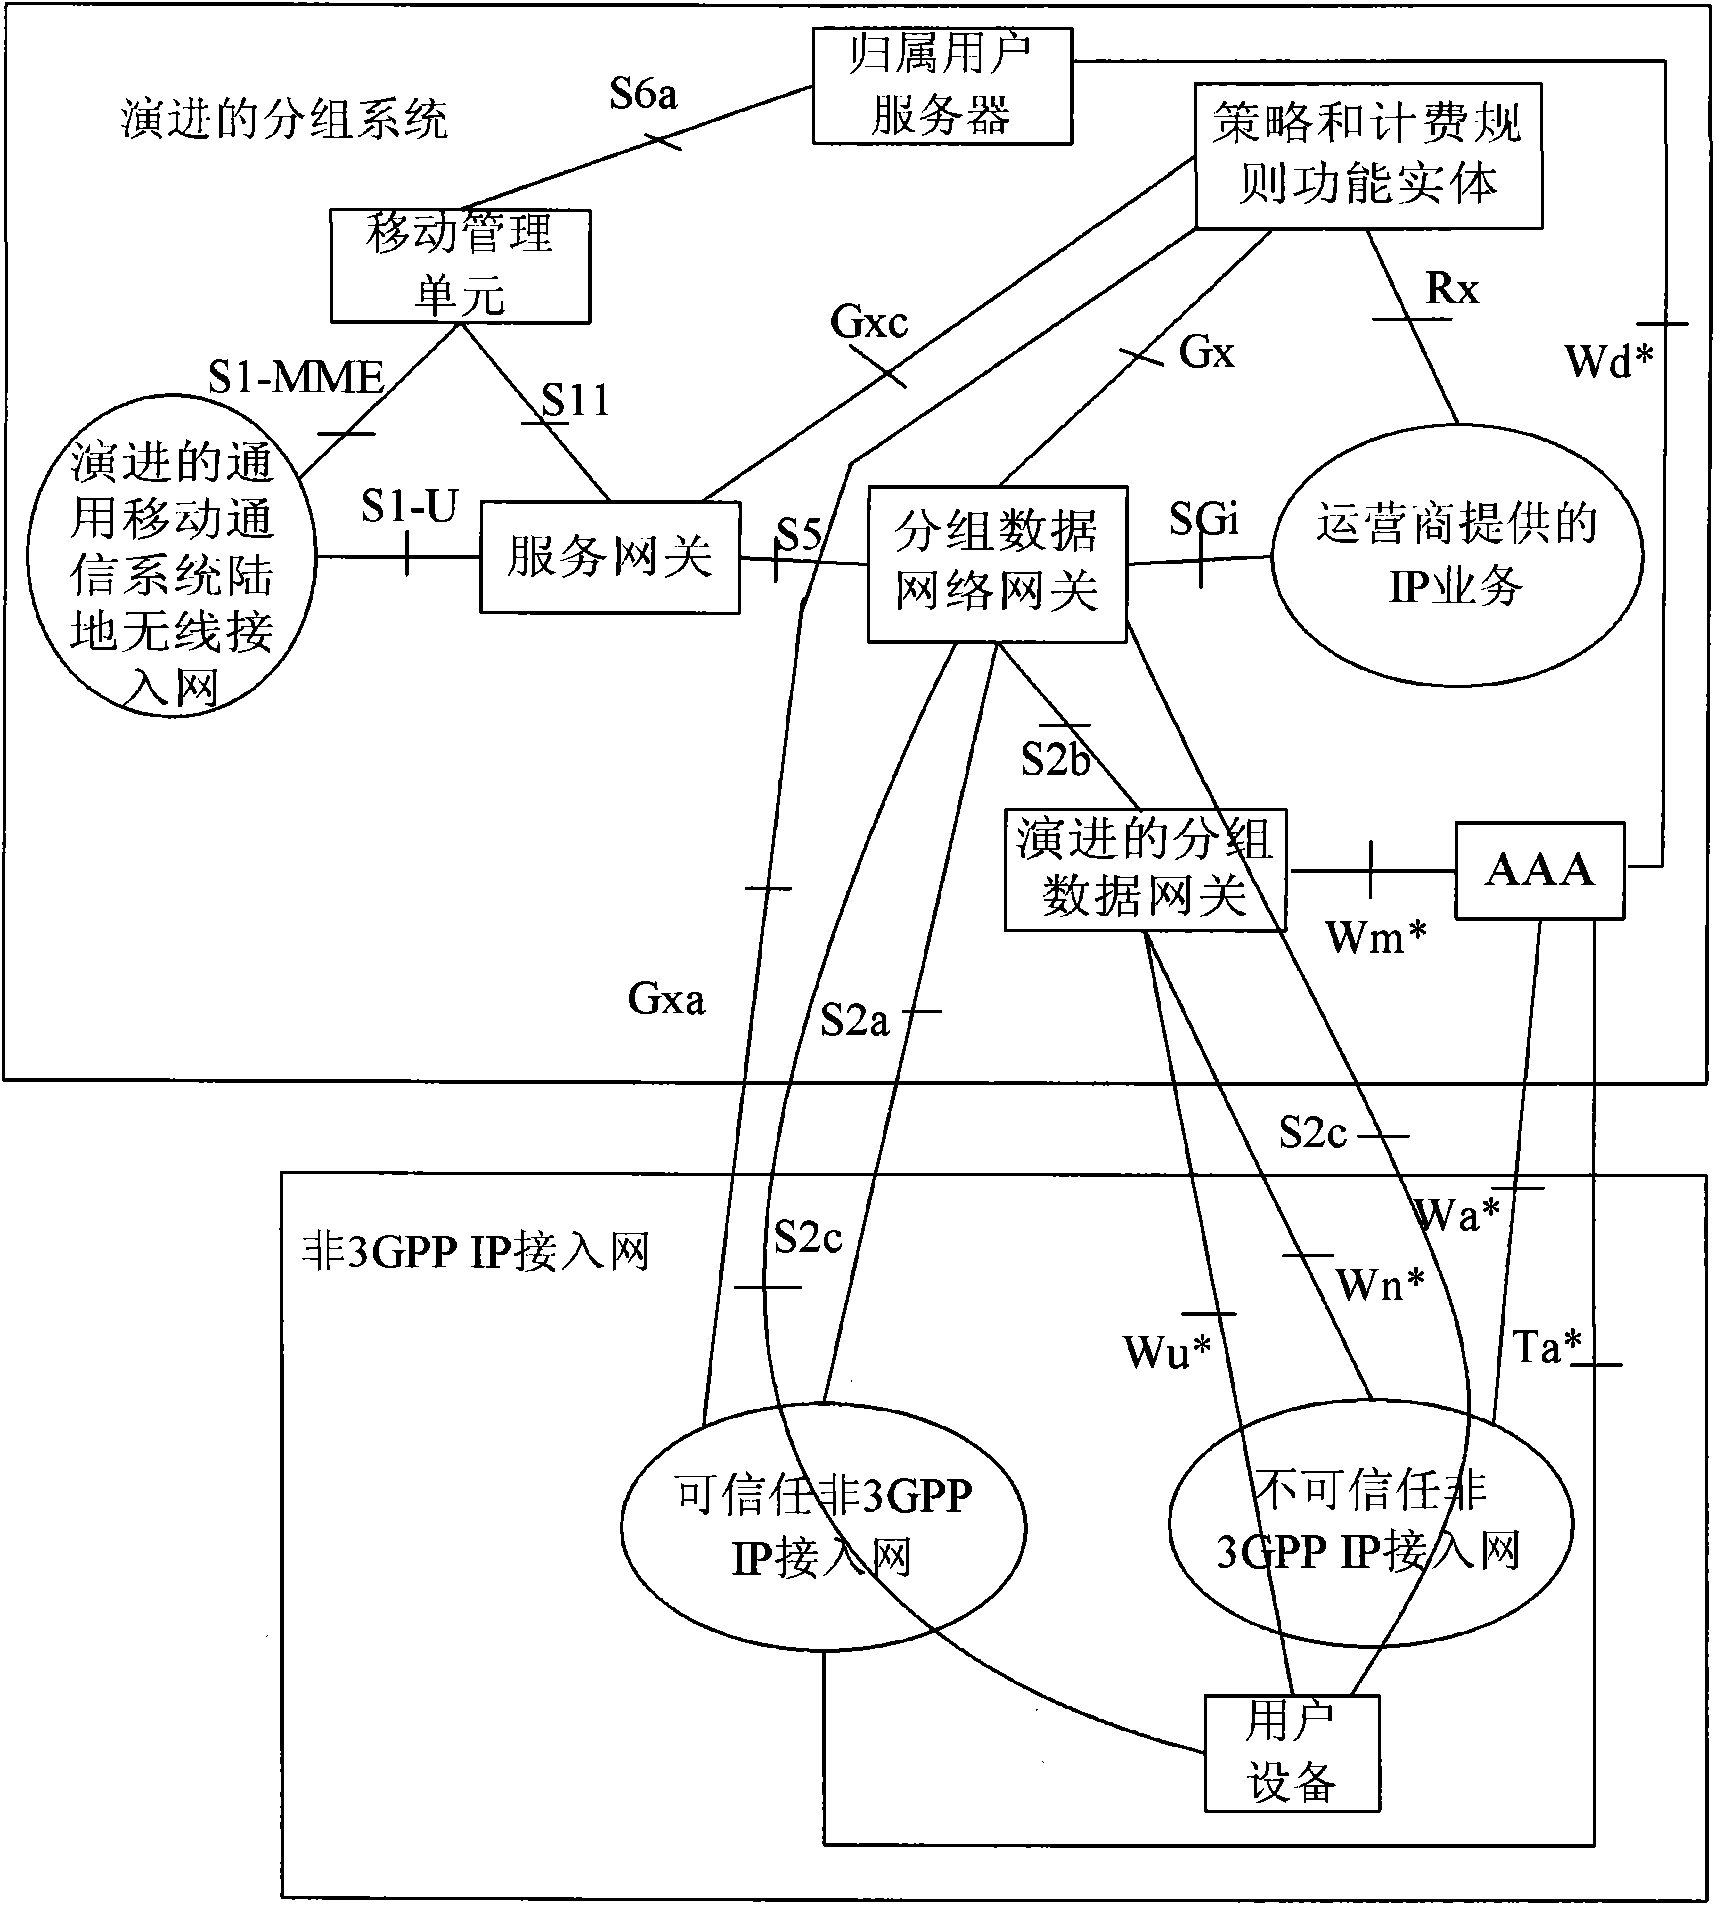 Method and system for realizing multi-access